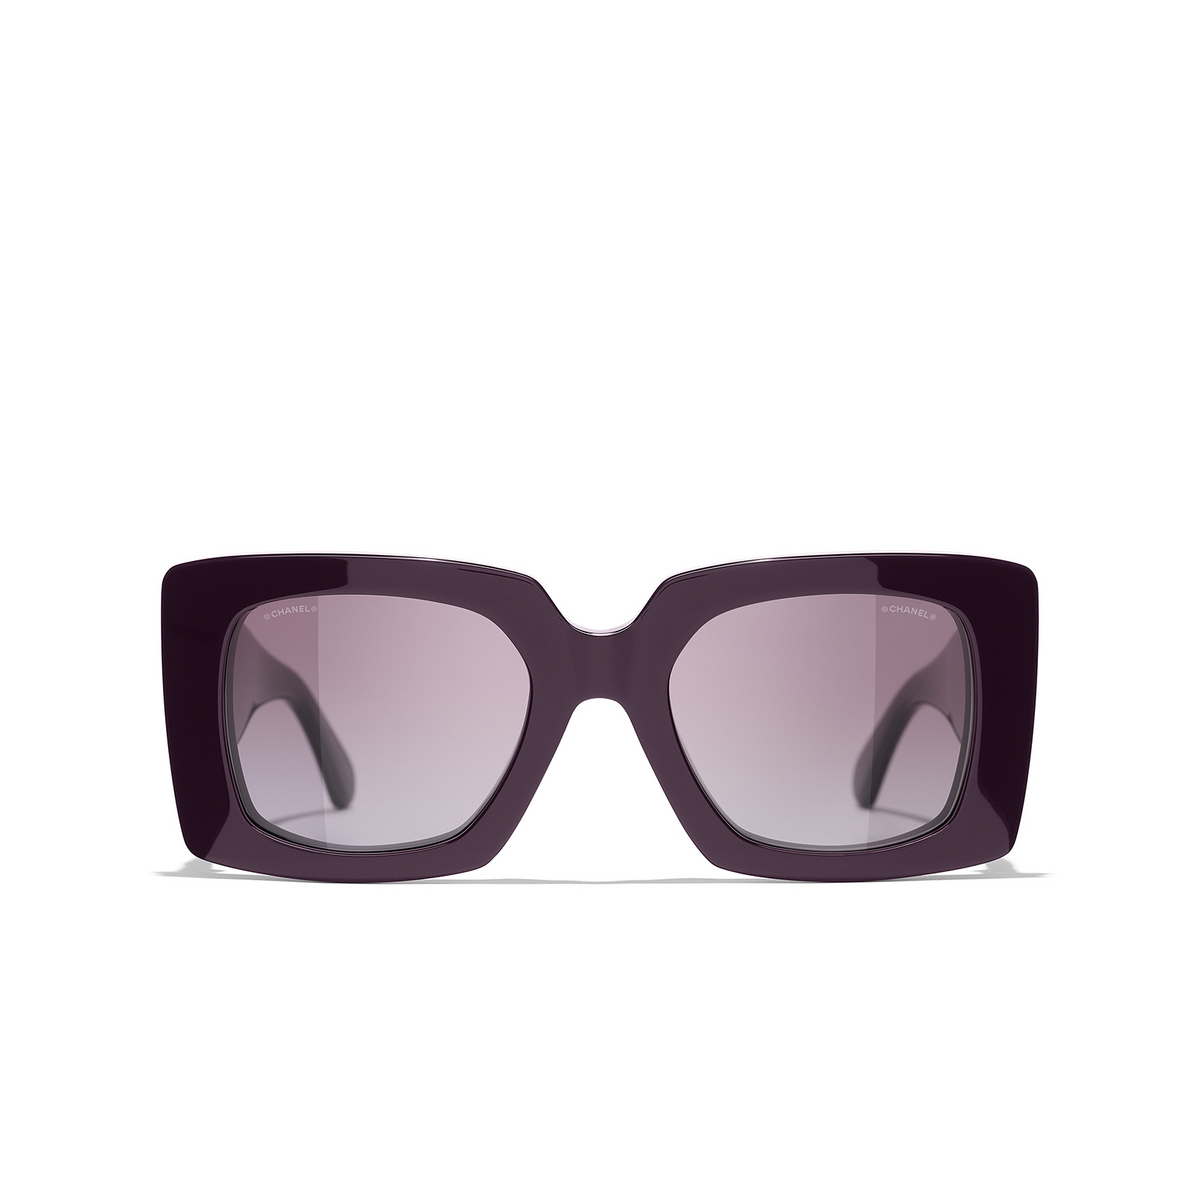 CHANEL square Sunglasses 1068S1 Burgundy - front view